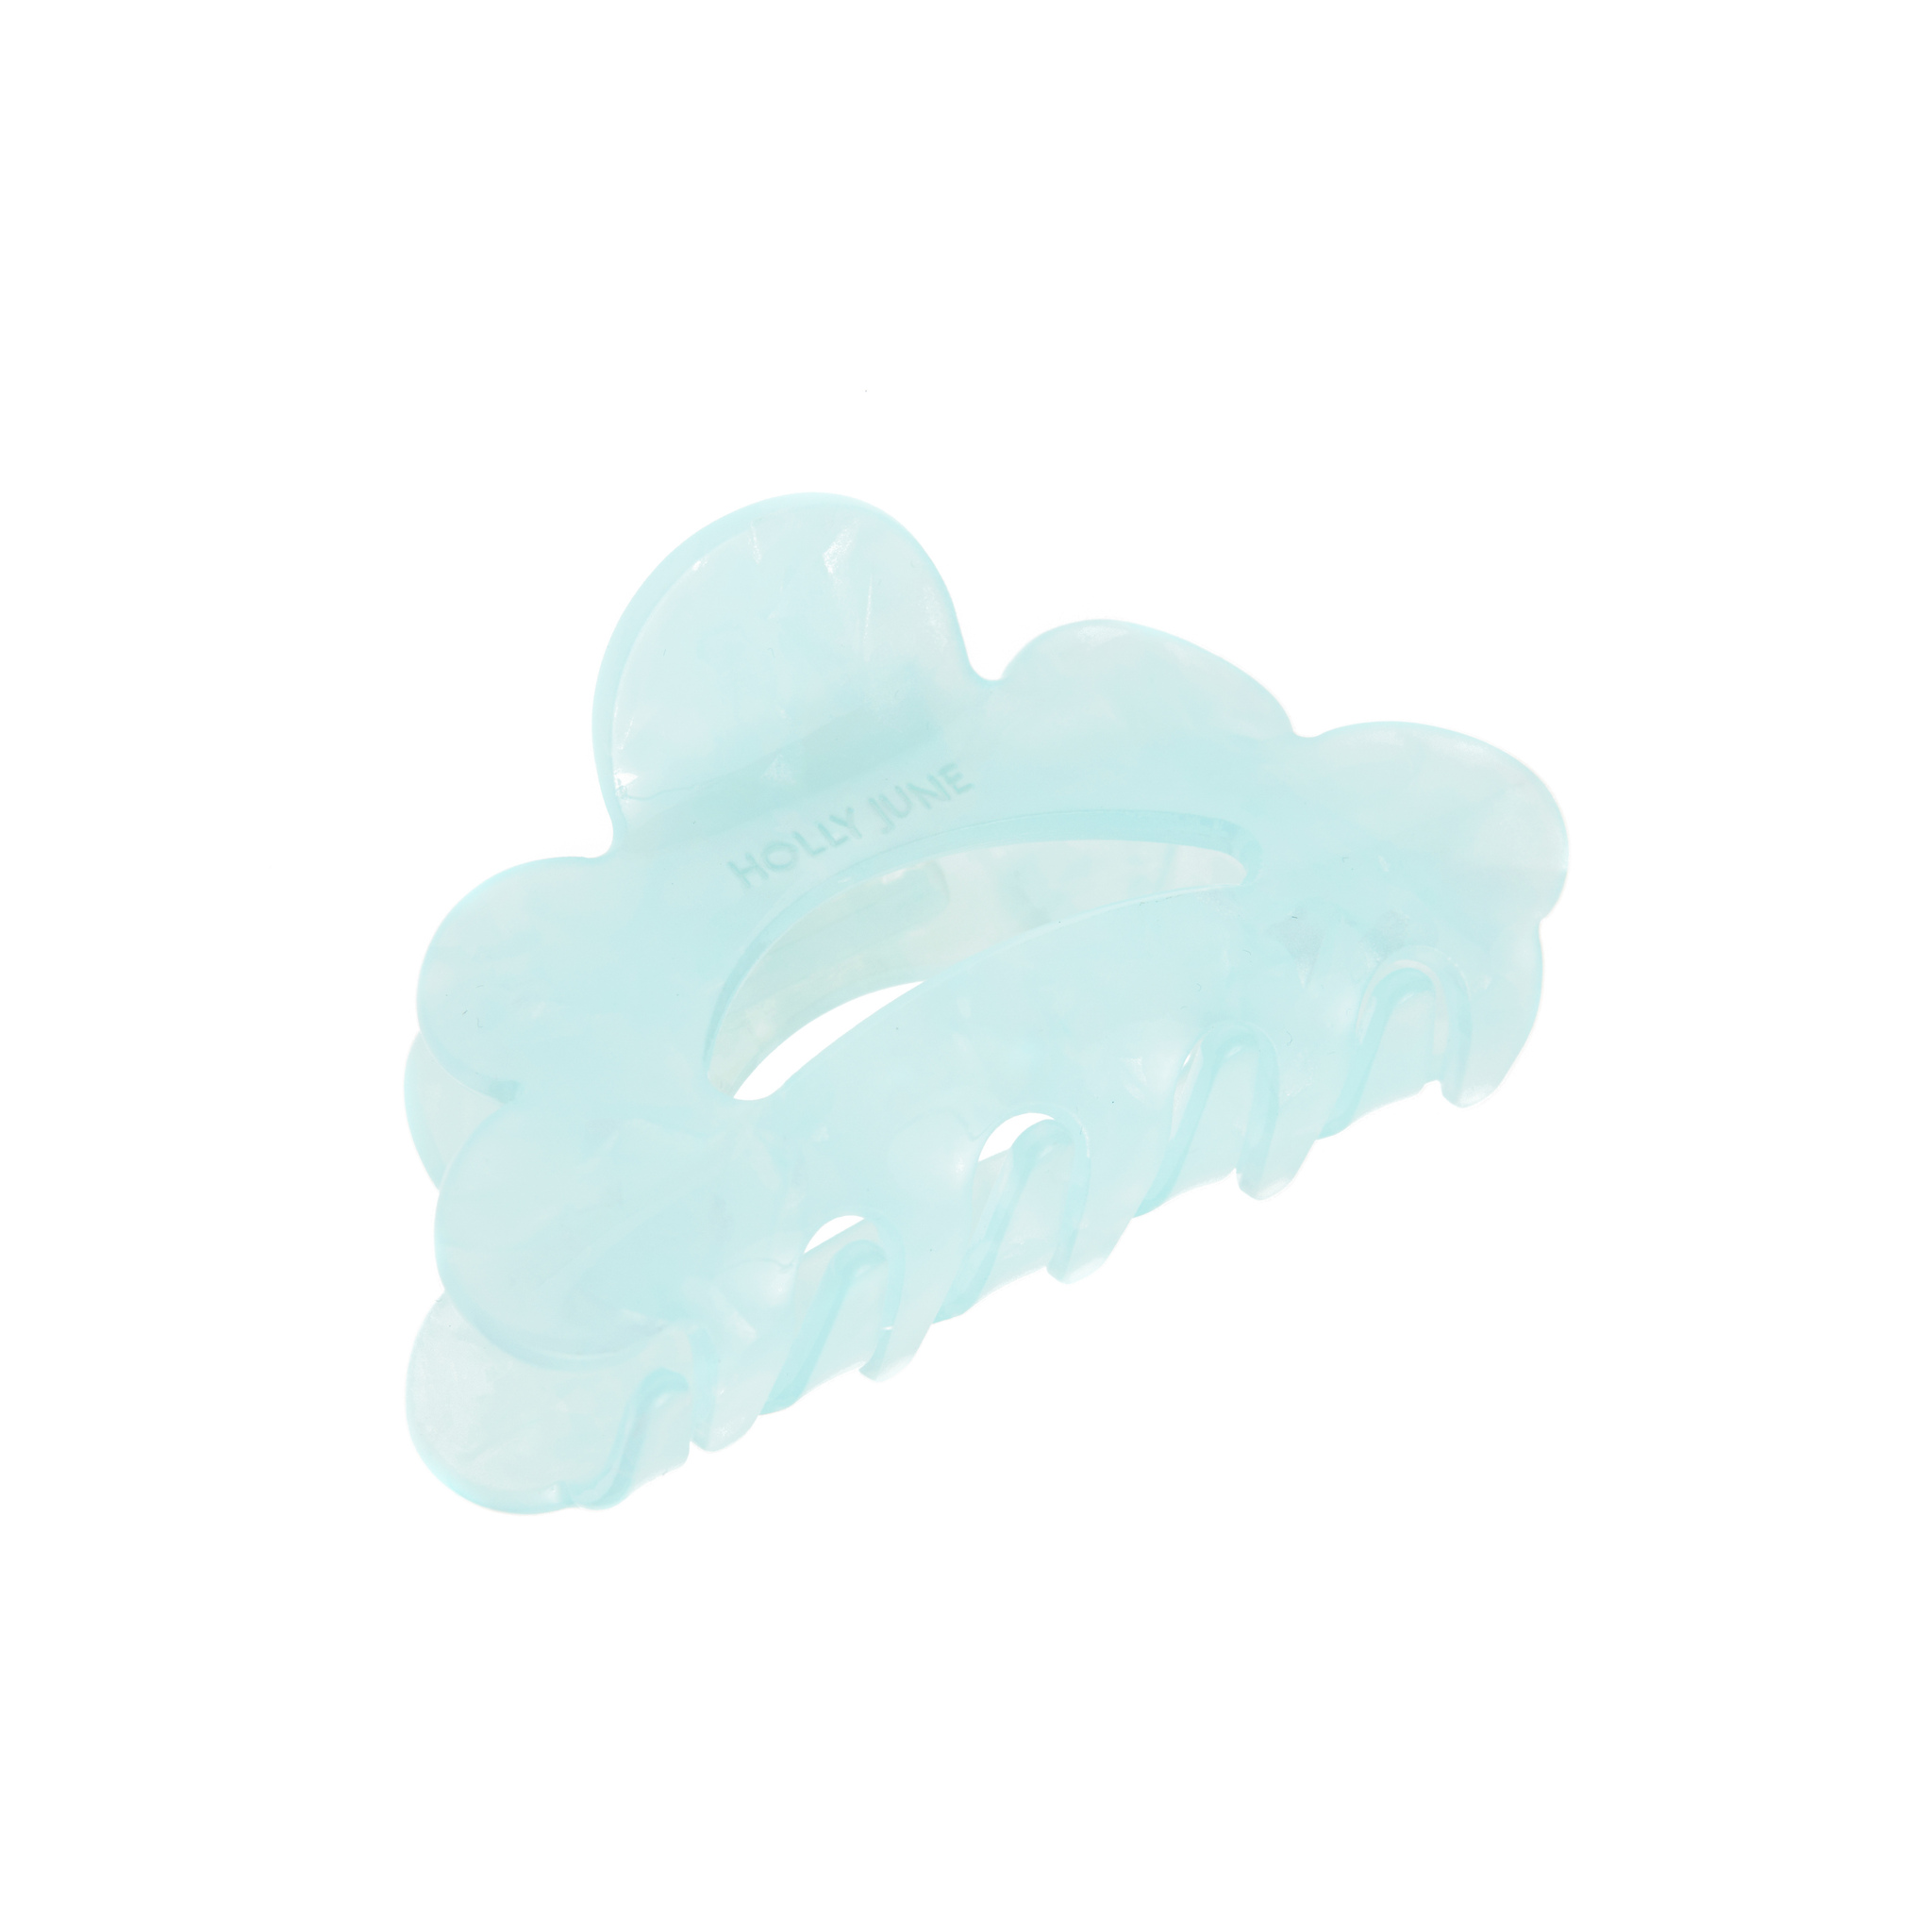 HOLLY JUNE Крабик Cloudy Hair Claw – Blue holly june крабик cloudy hair claw – moonlight blue